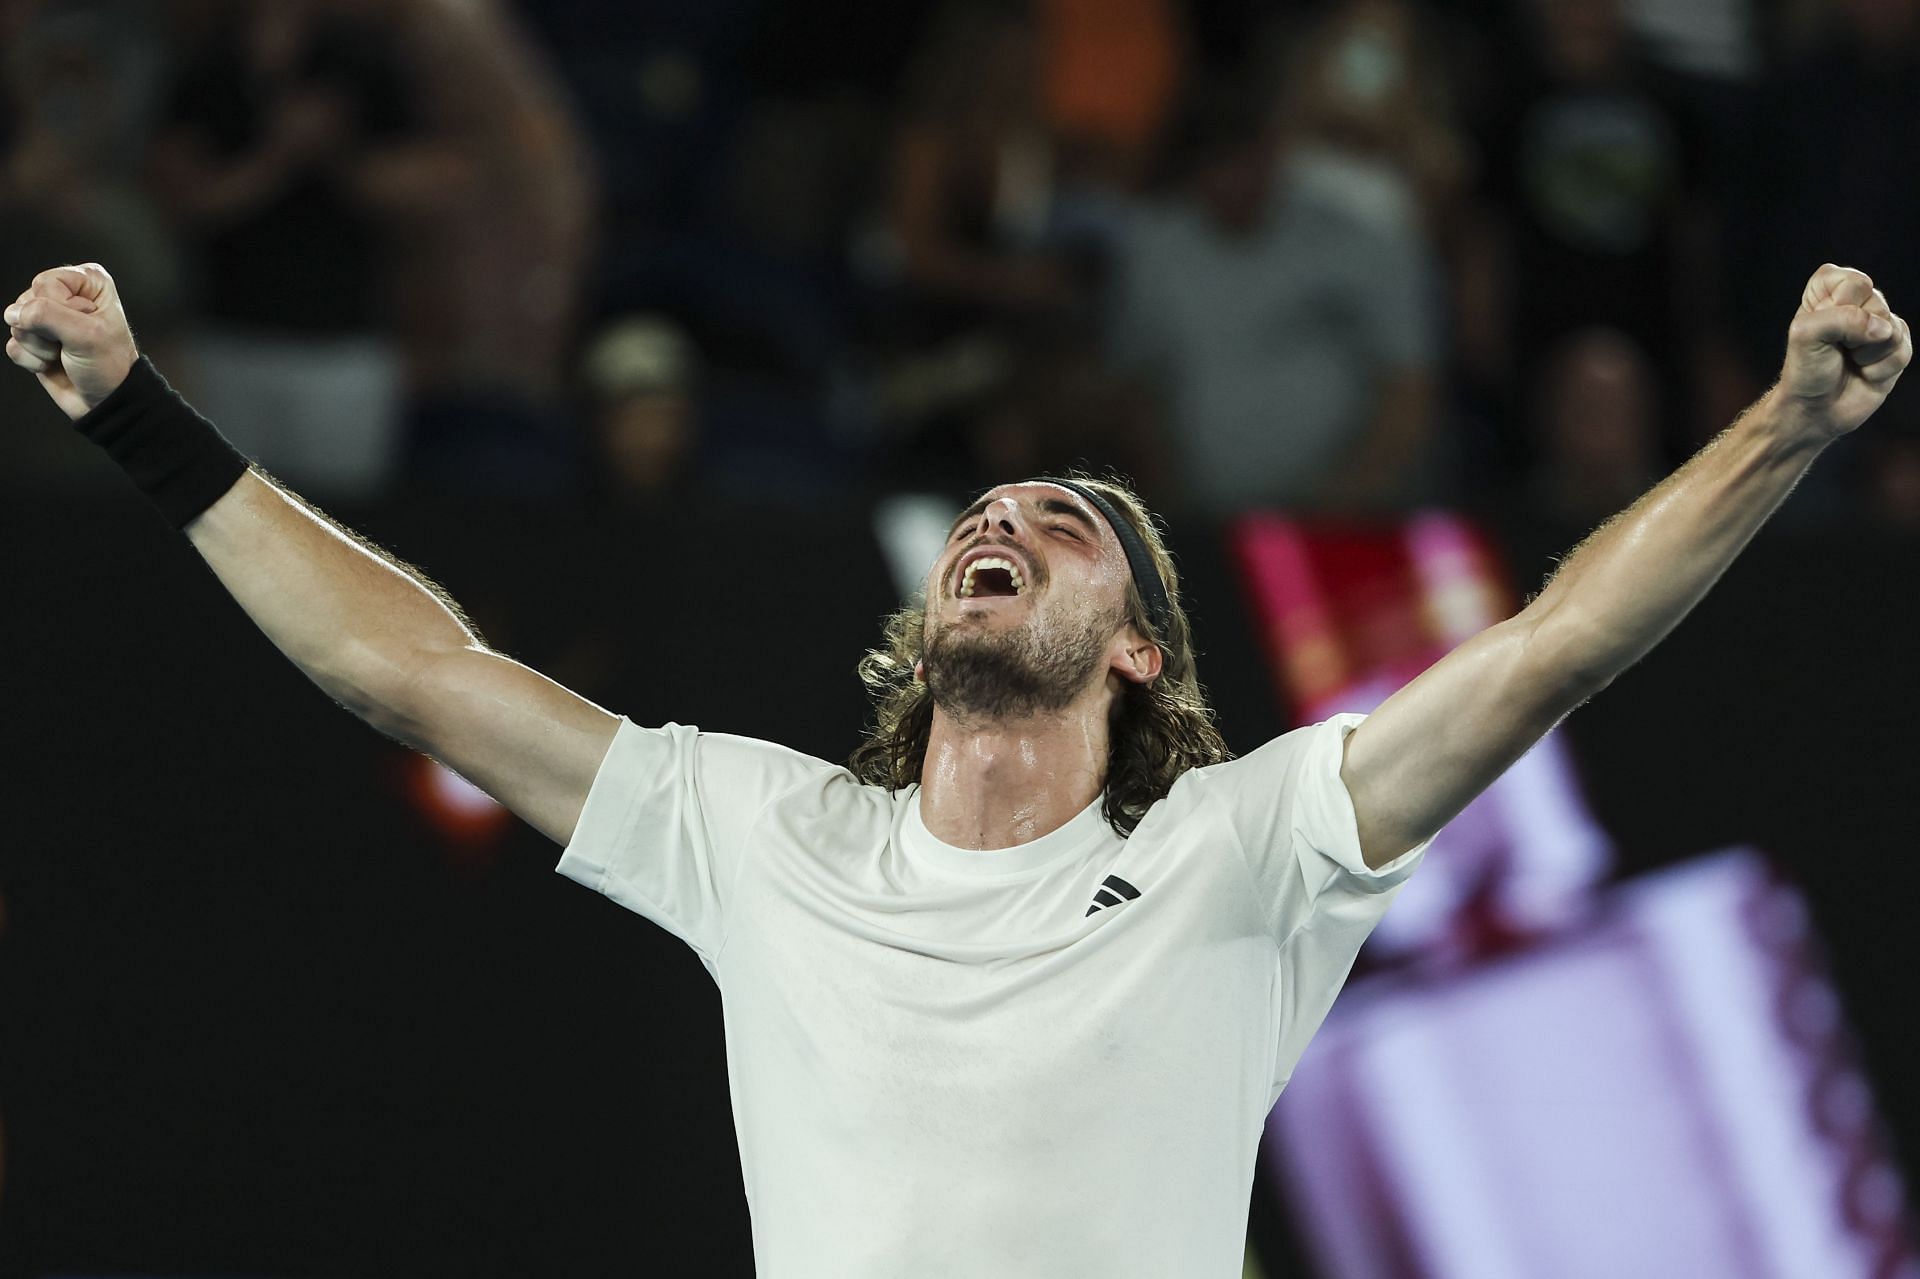 Tsitsipas has been on a roll at Melbourne Park.